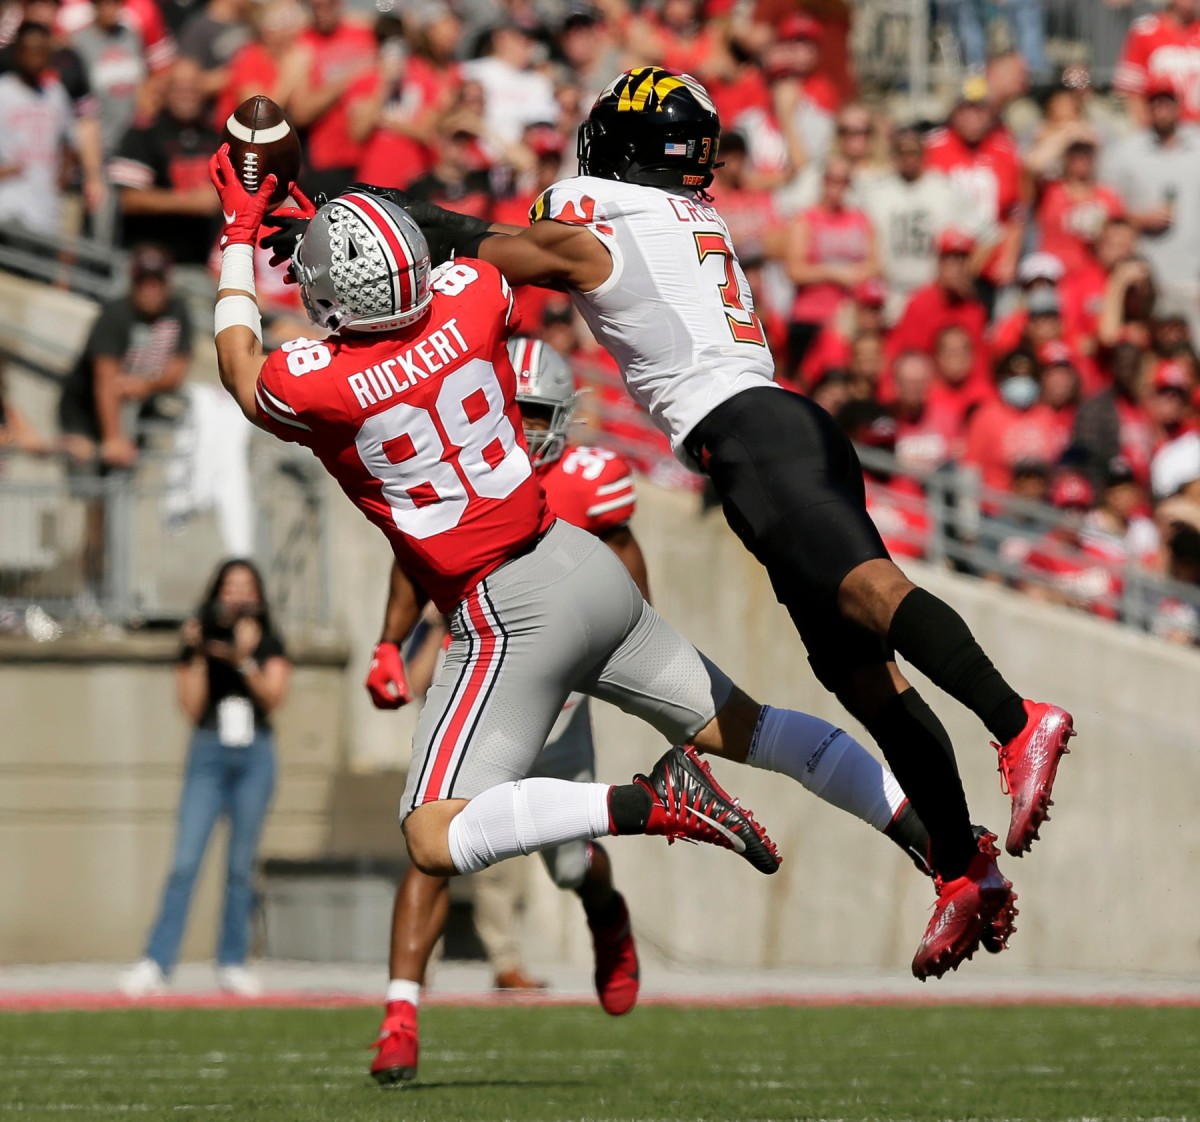 Ohio State Buckeyes tight end Jeremy Ruckert (88) can't reel in a pass as he is defended by Maryland Terrapins defensive back Nick Cross (3) during the first half of Saturday's NCAA Division I football game at Ohio Stadium in Columbus on October 9, 2021. Osu21mary Bjp 696